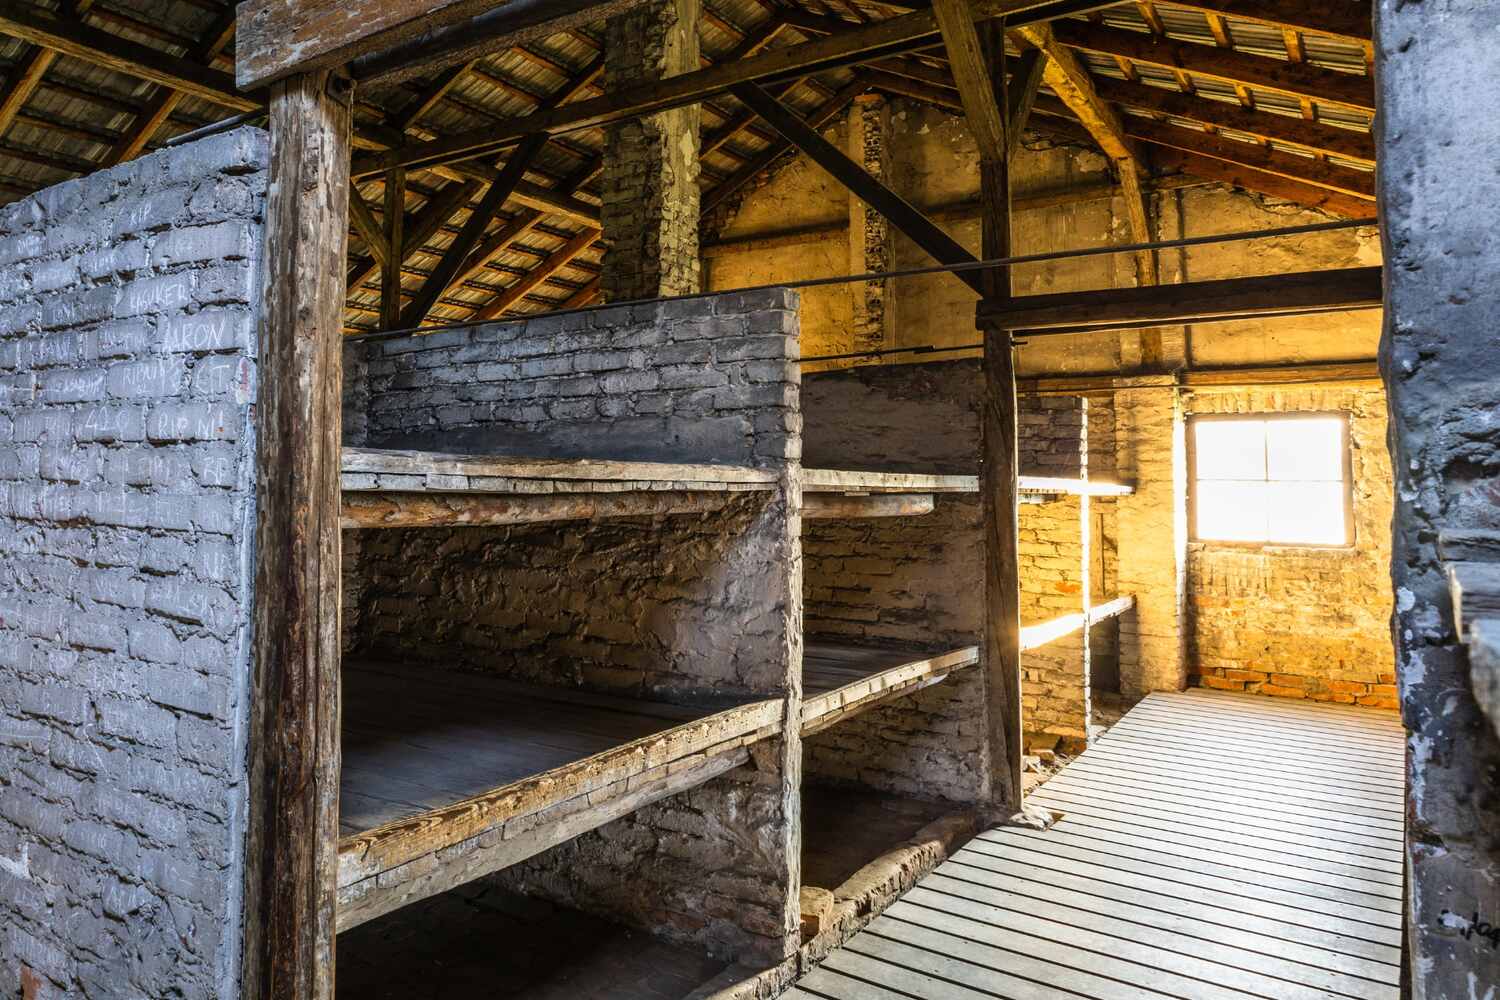 Wooden bunks in a concentration camp barracks.